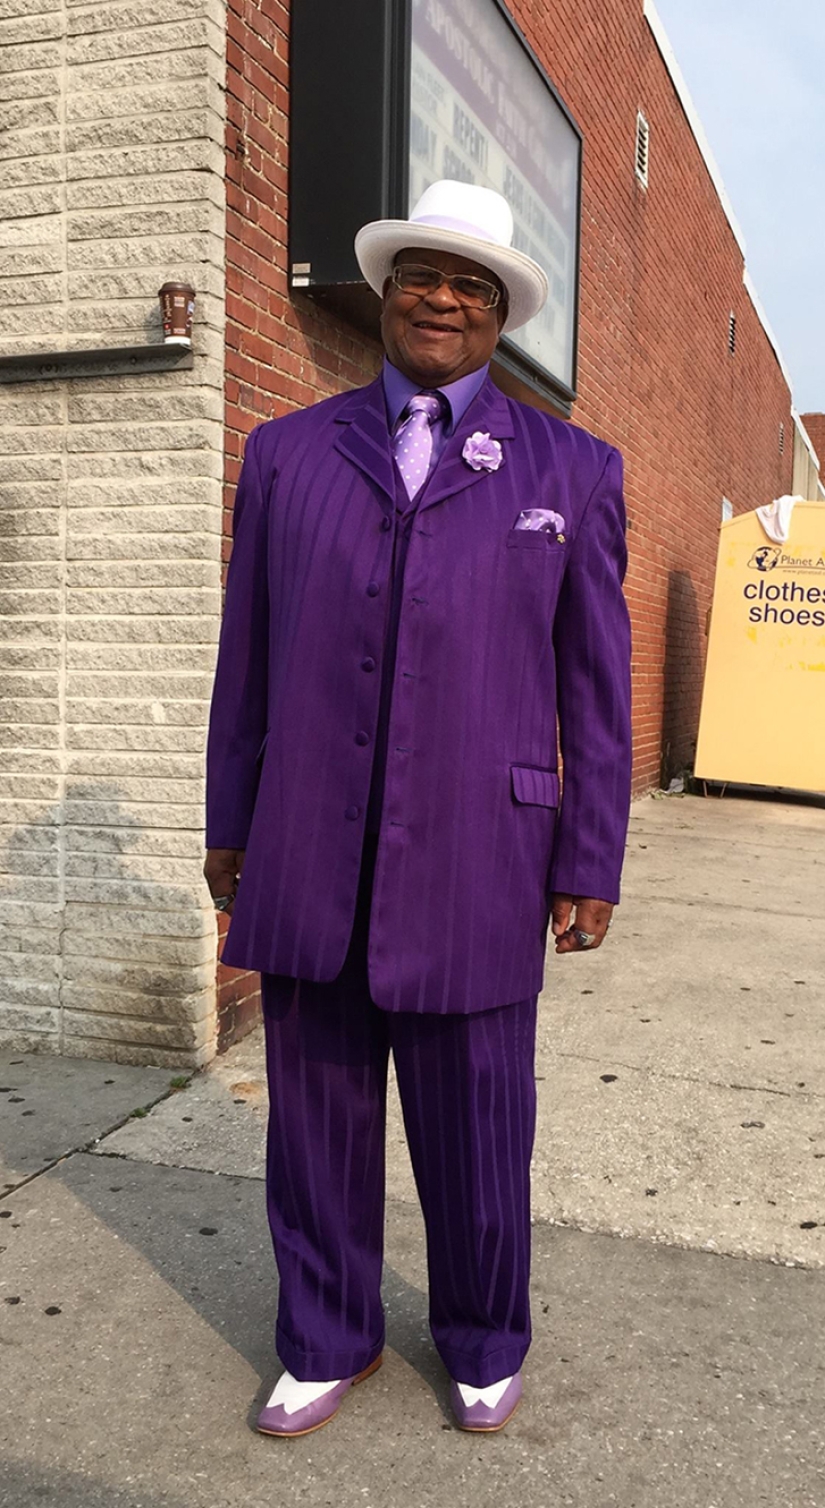 The mystery of the Sunday fashionista from Baltimore